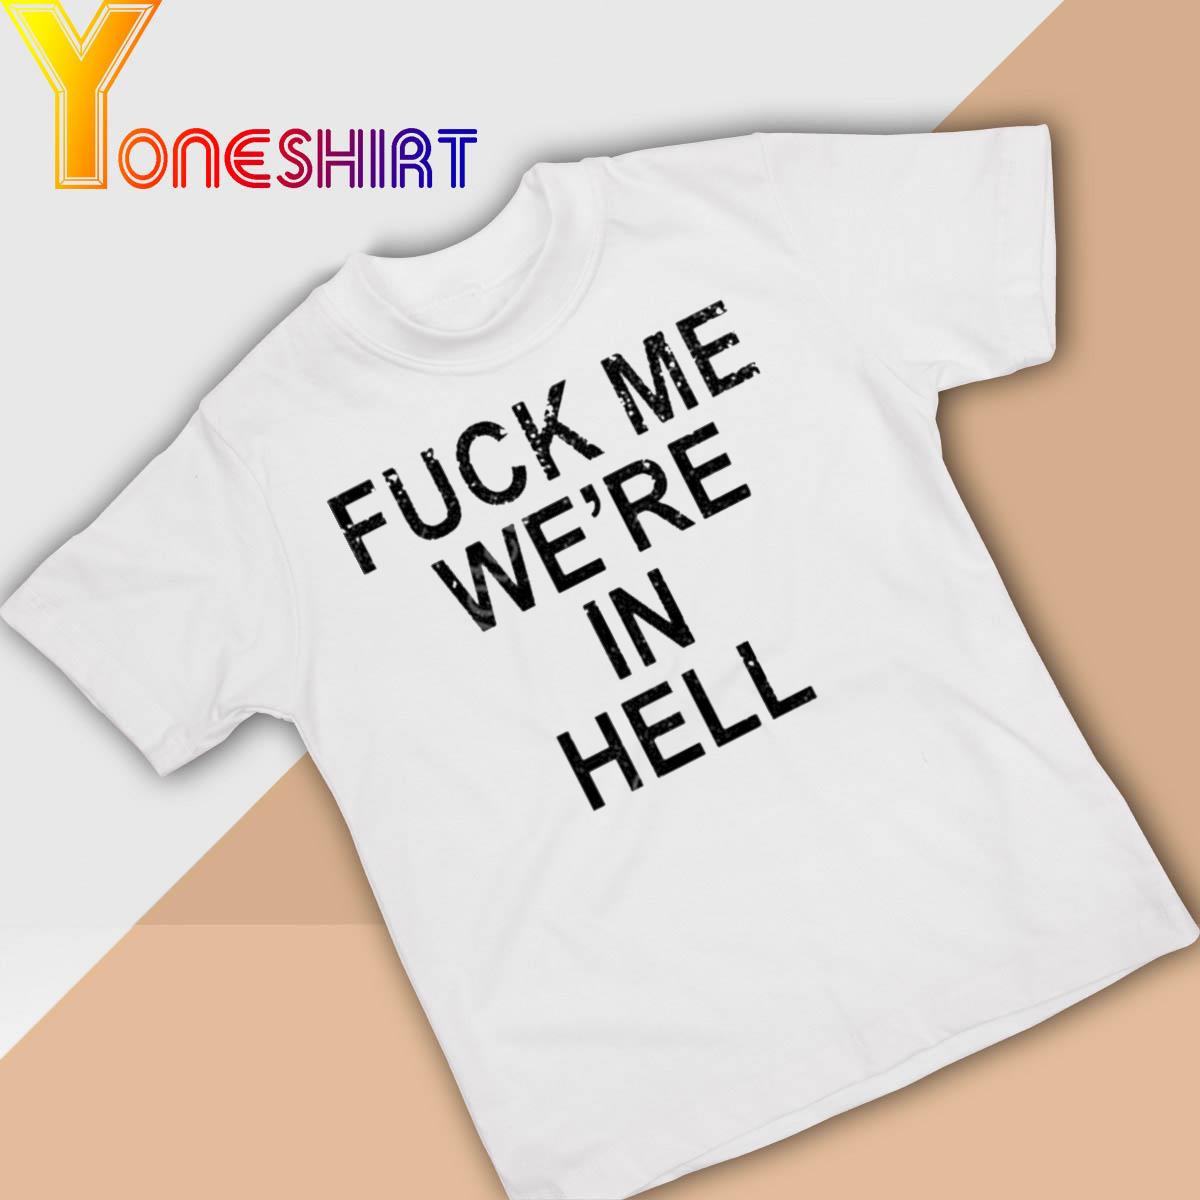 Official Fuck Me We’re In Hell shirt